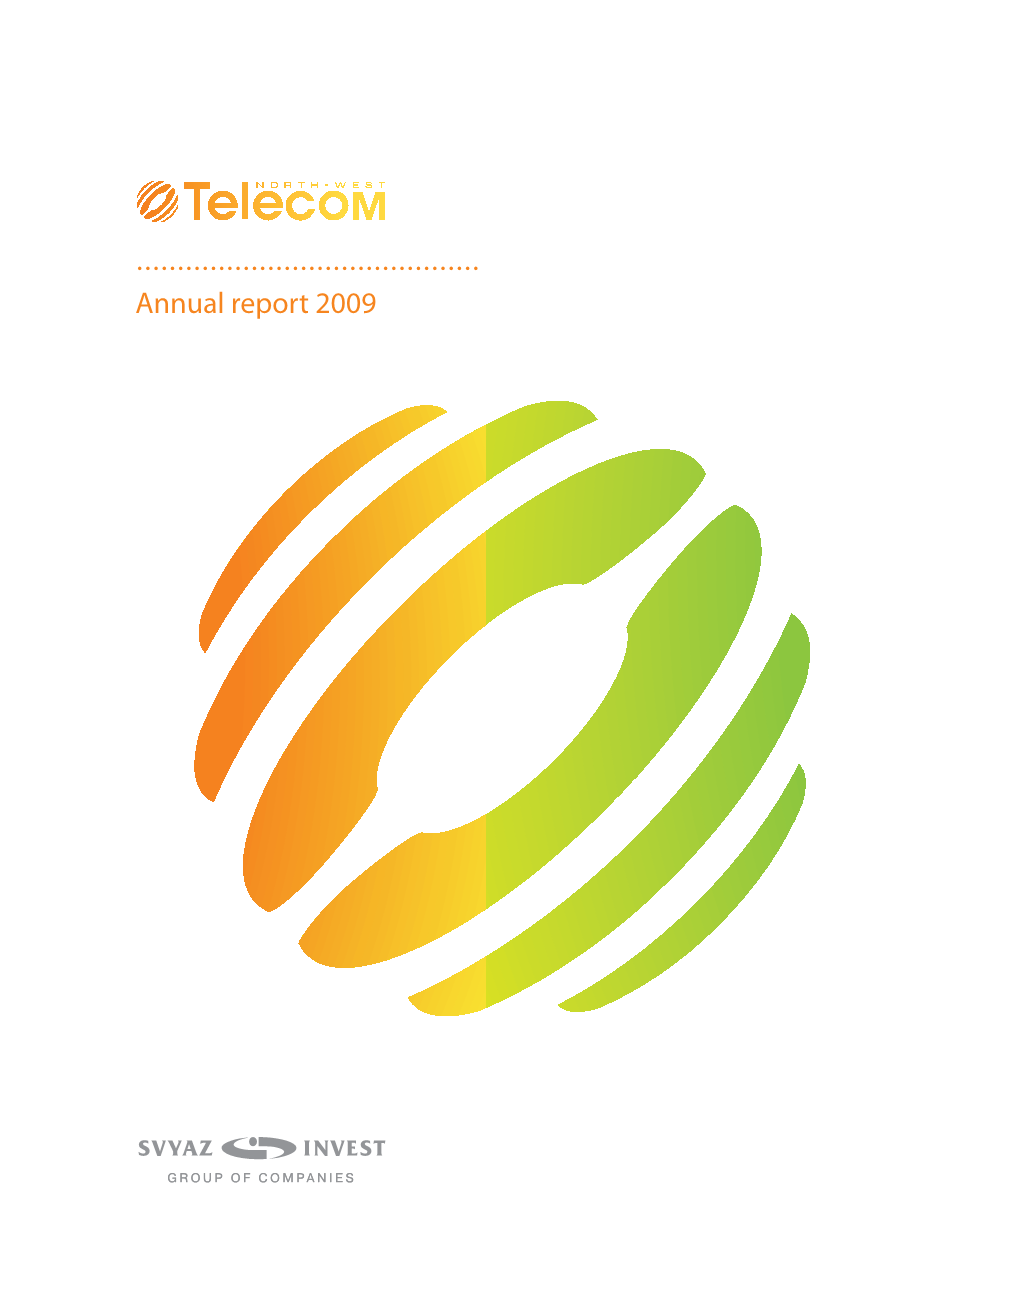 Annual Report 2009 for People Annual Report 2009 to Understand Each Other, It Is Important to Assist Them Communicate Bright Colors of Communication